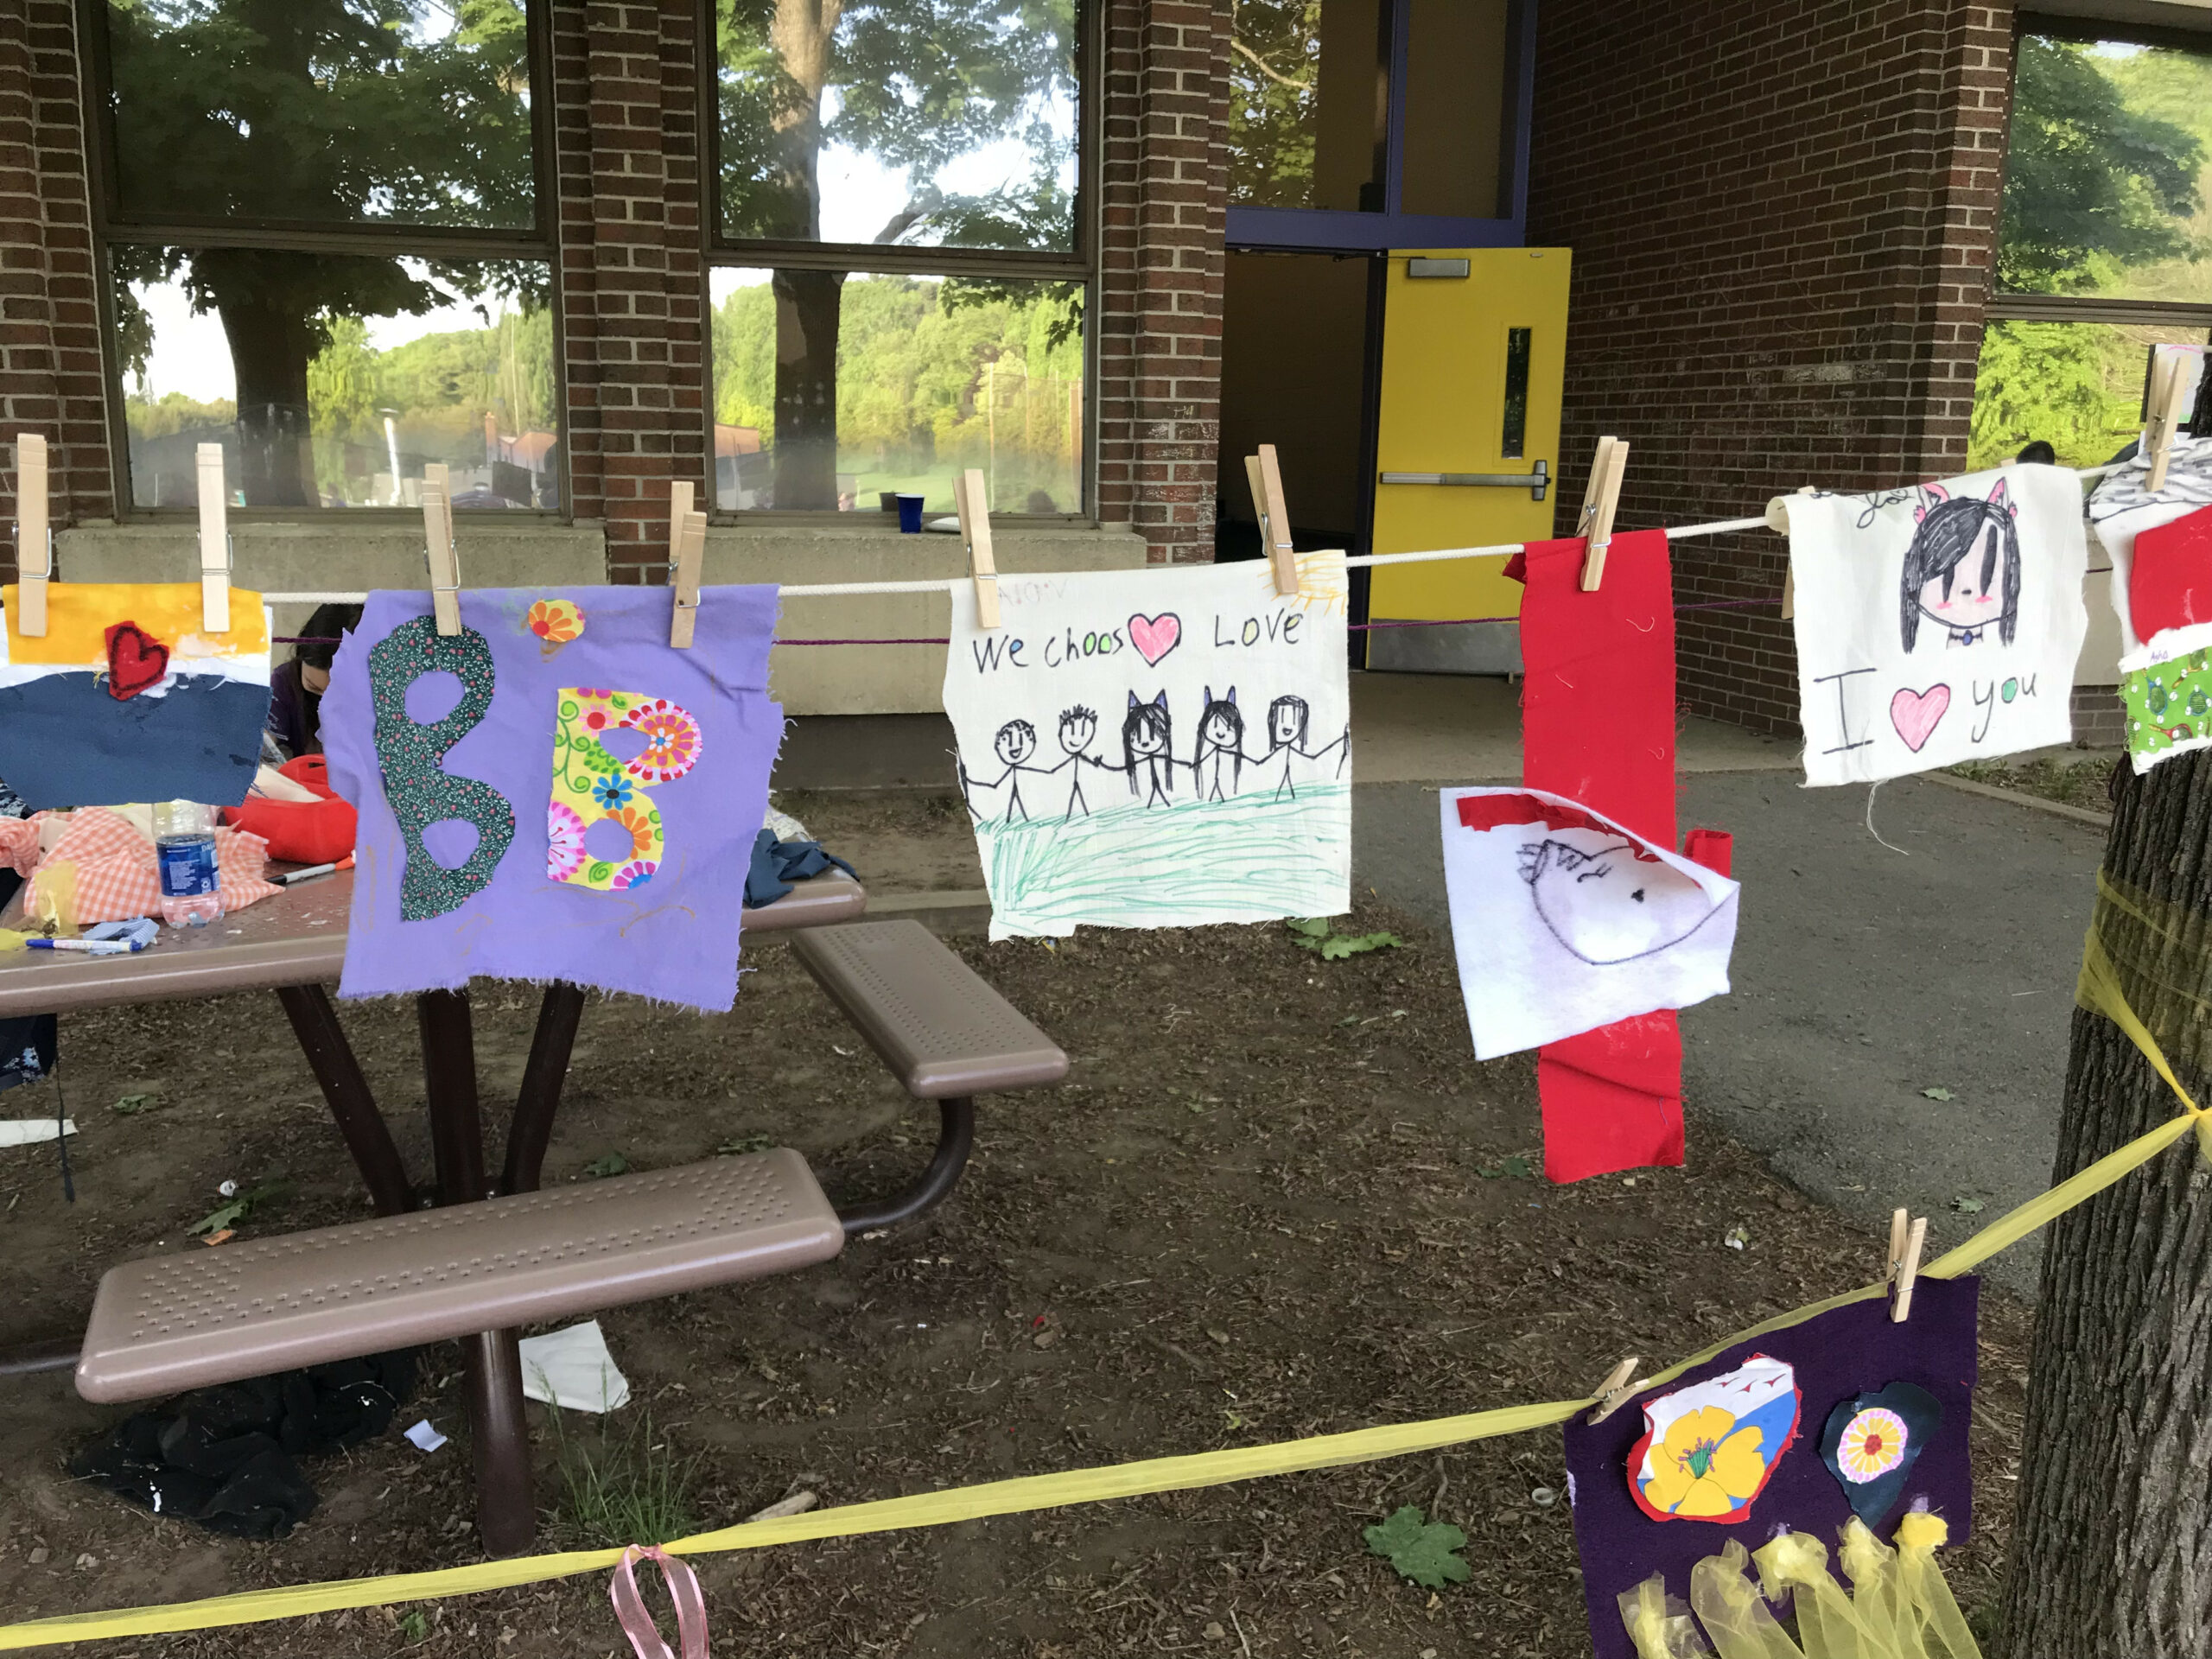 Image of children's drawings on a clothesline